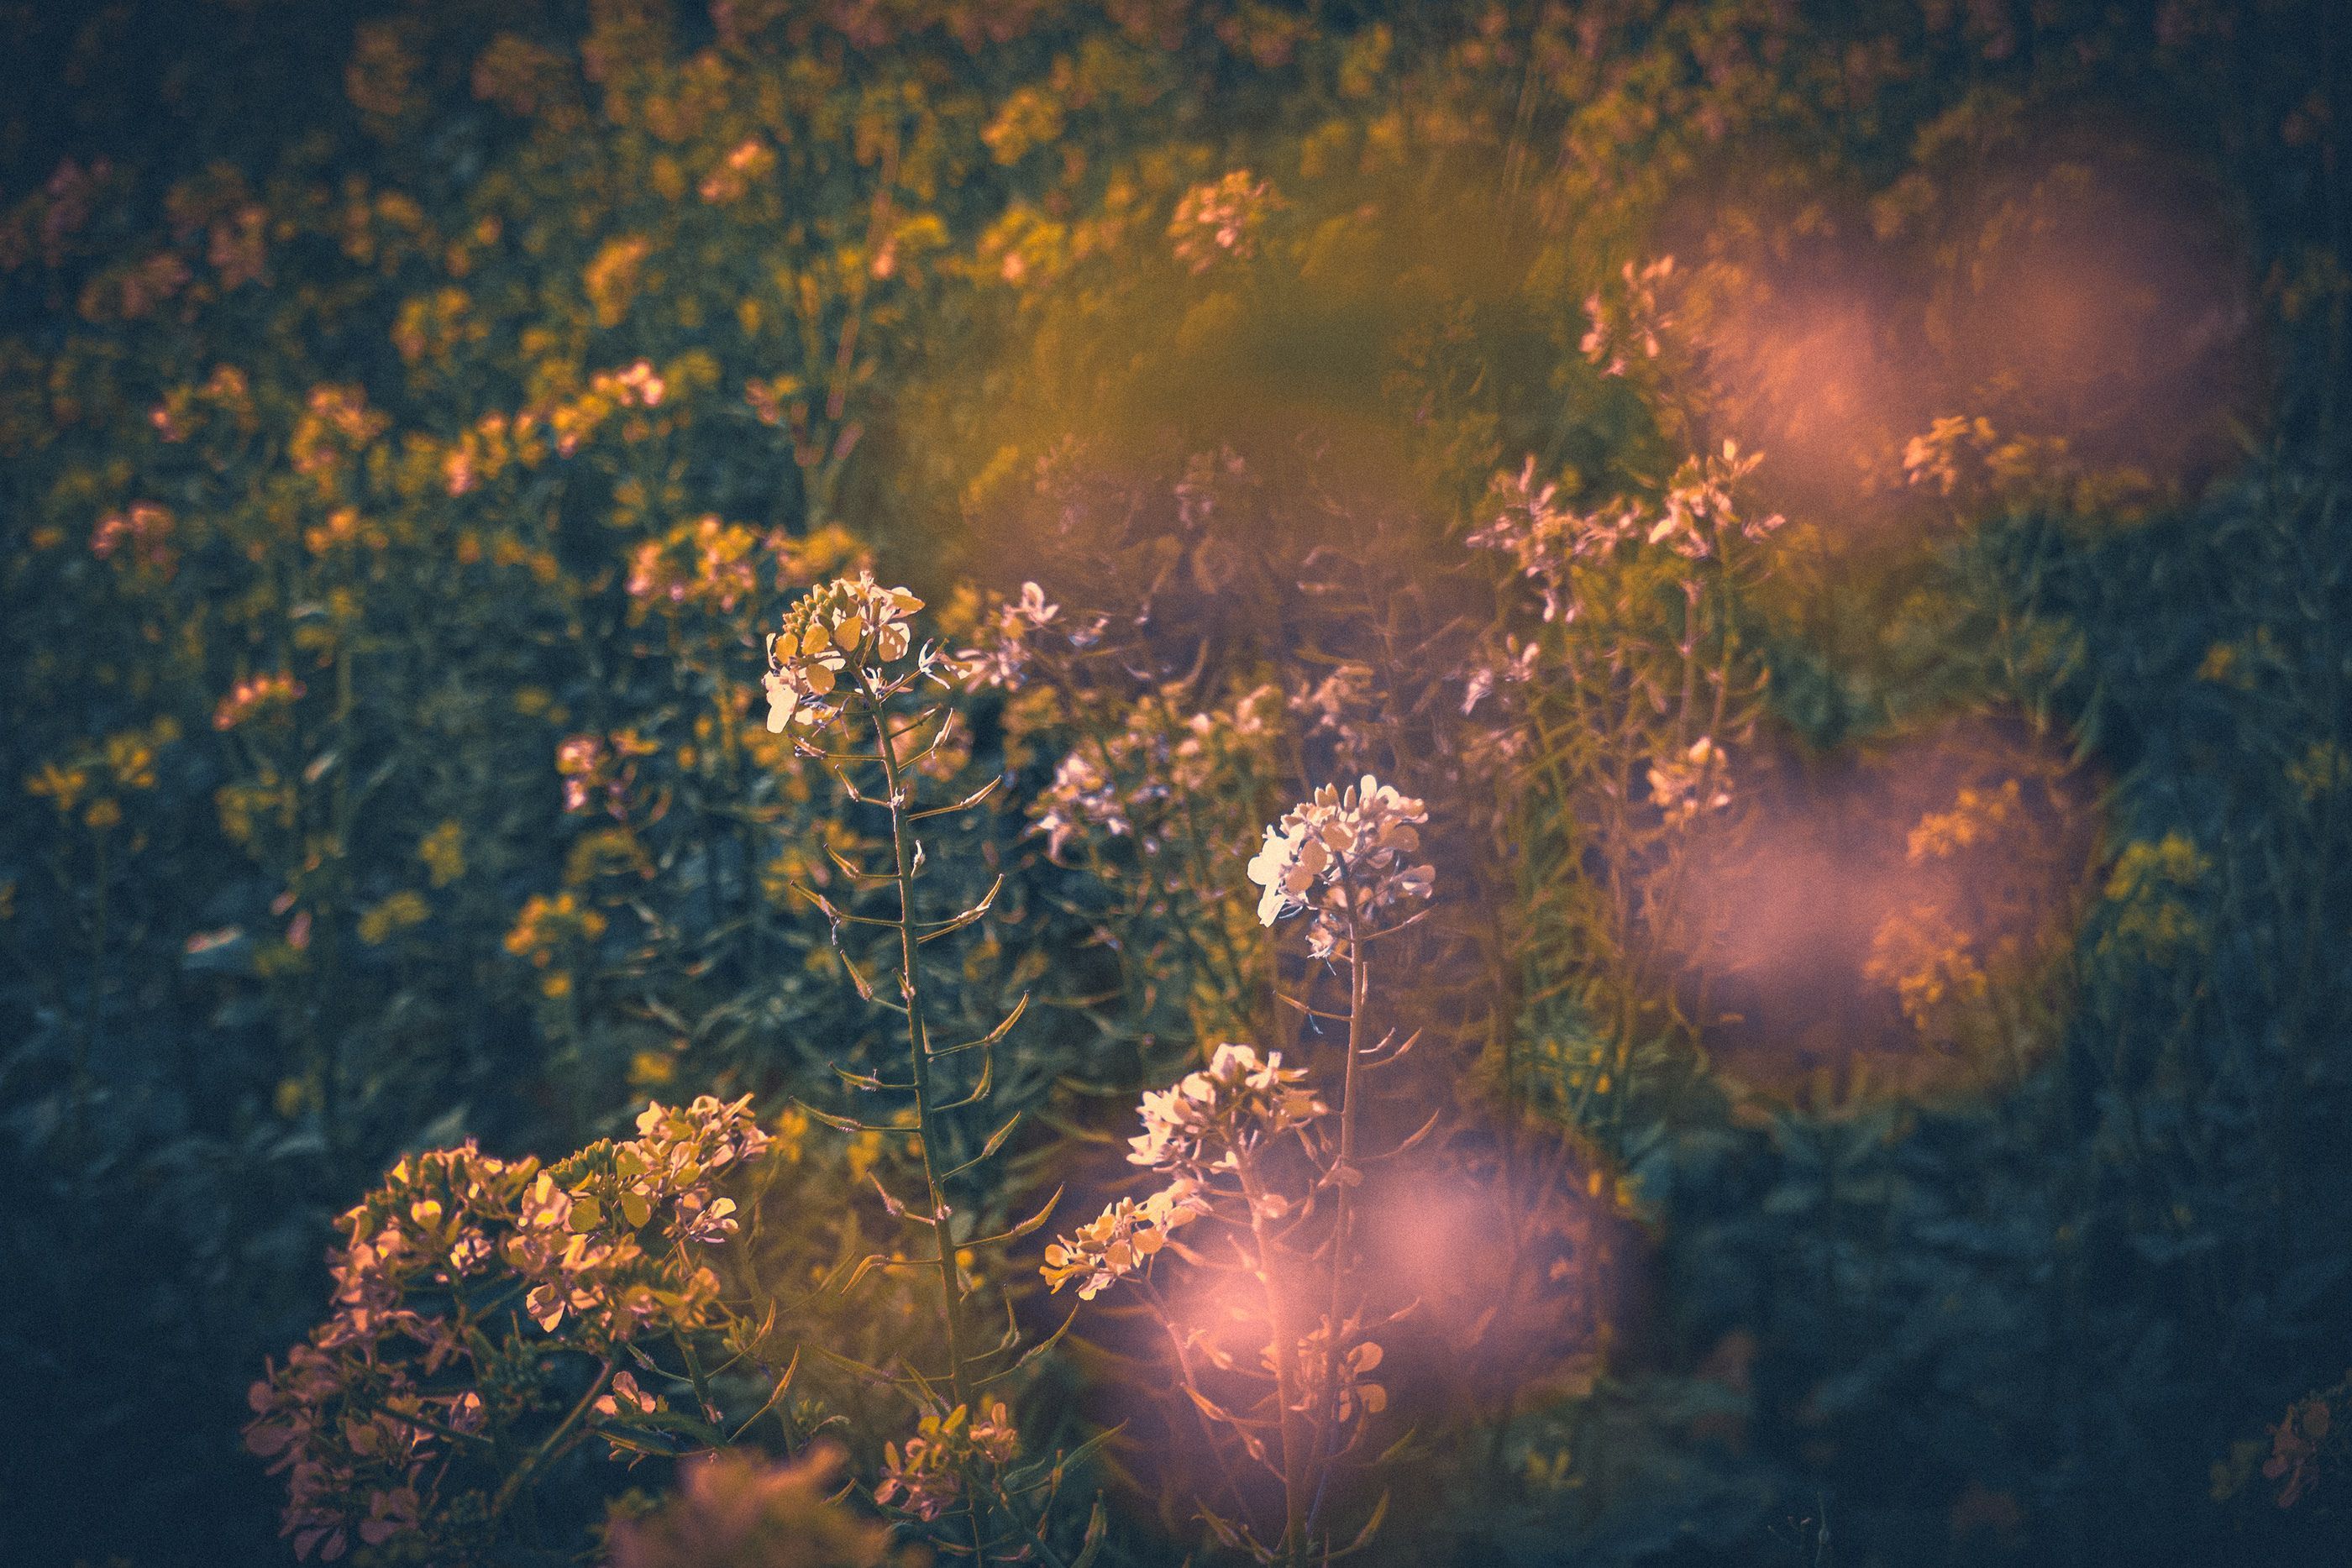 A flower field with some pink flowers in it - Grunge, indie